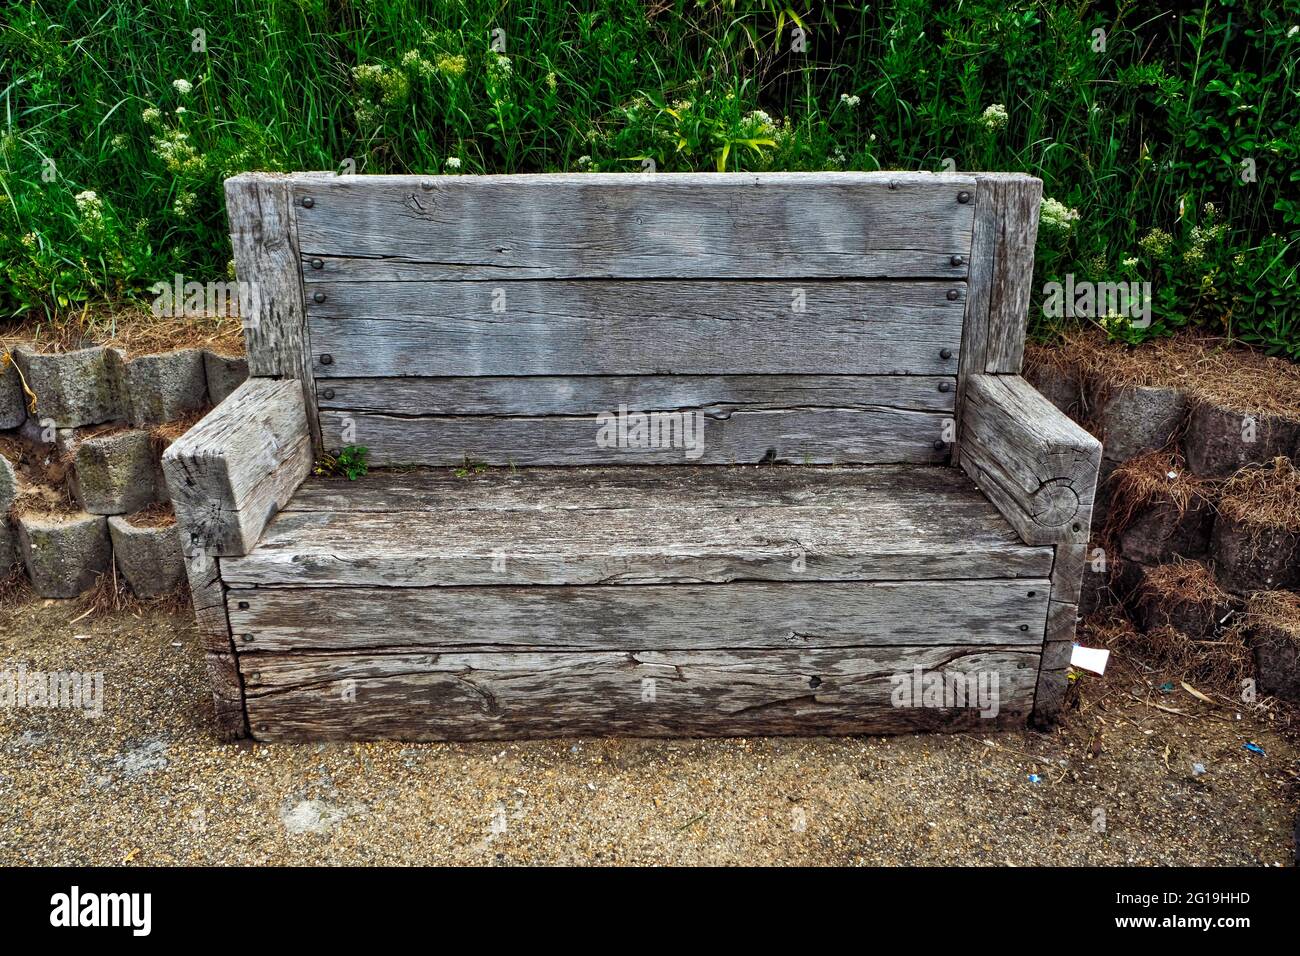 wooden bench at Mablethorpe, Lincolnshire, Stock Photo